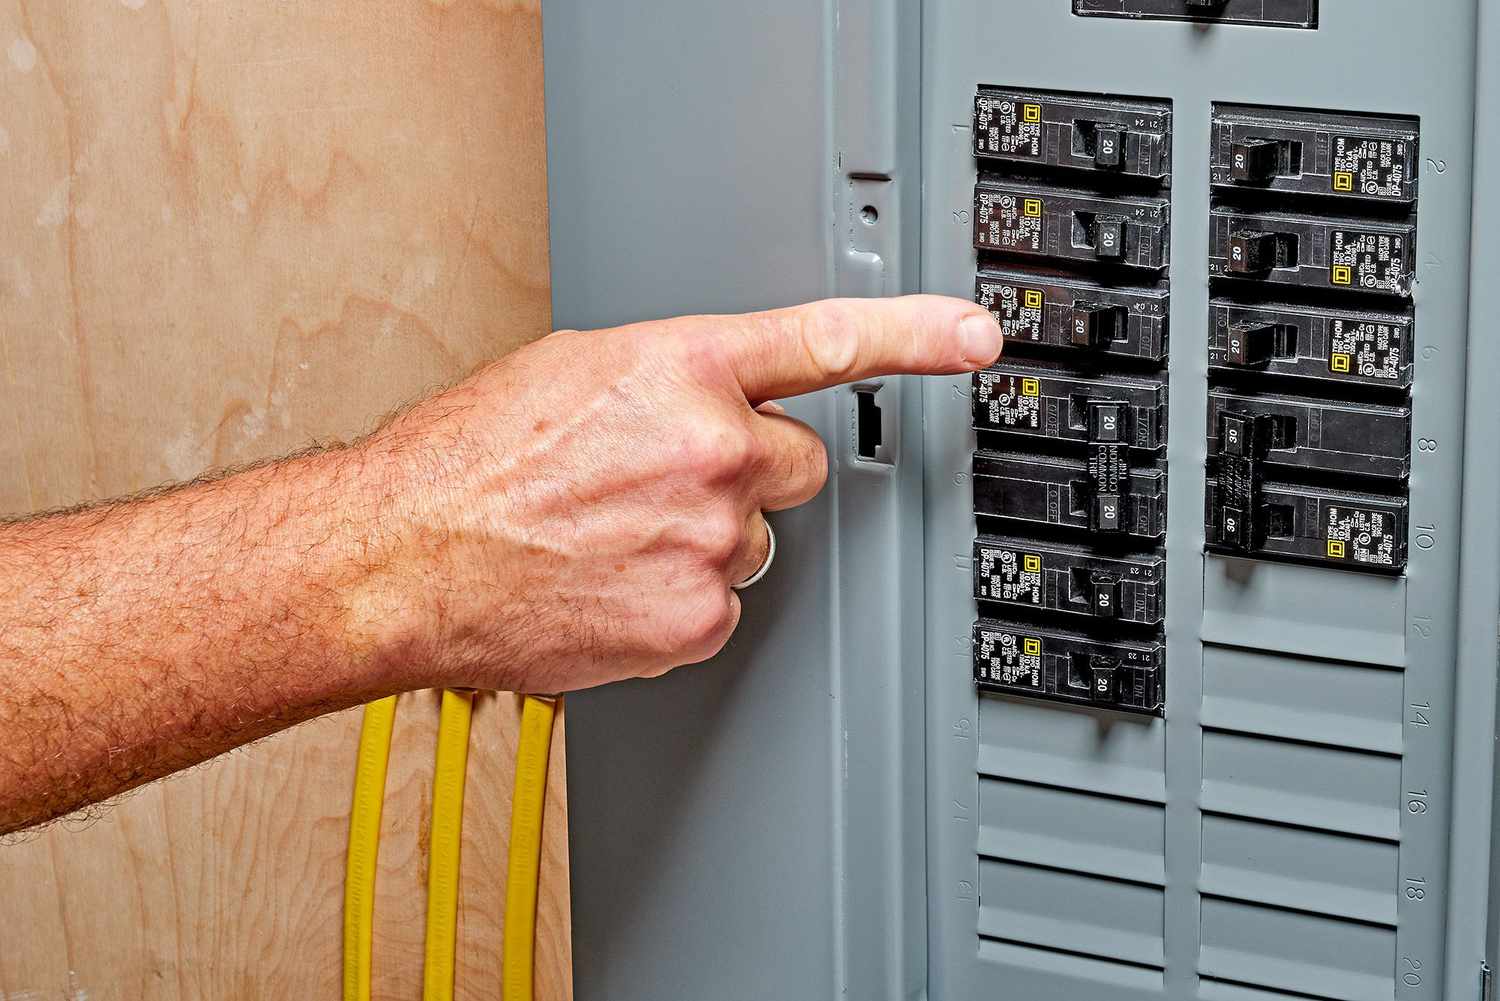 Finger pointing to tripped circuit breaker in service panel